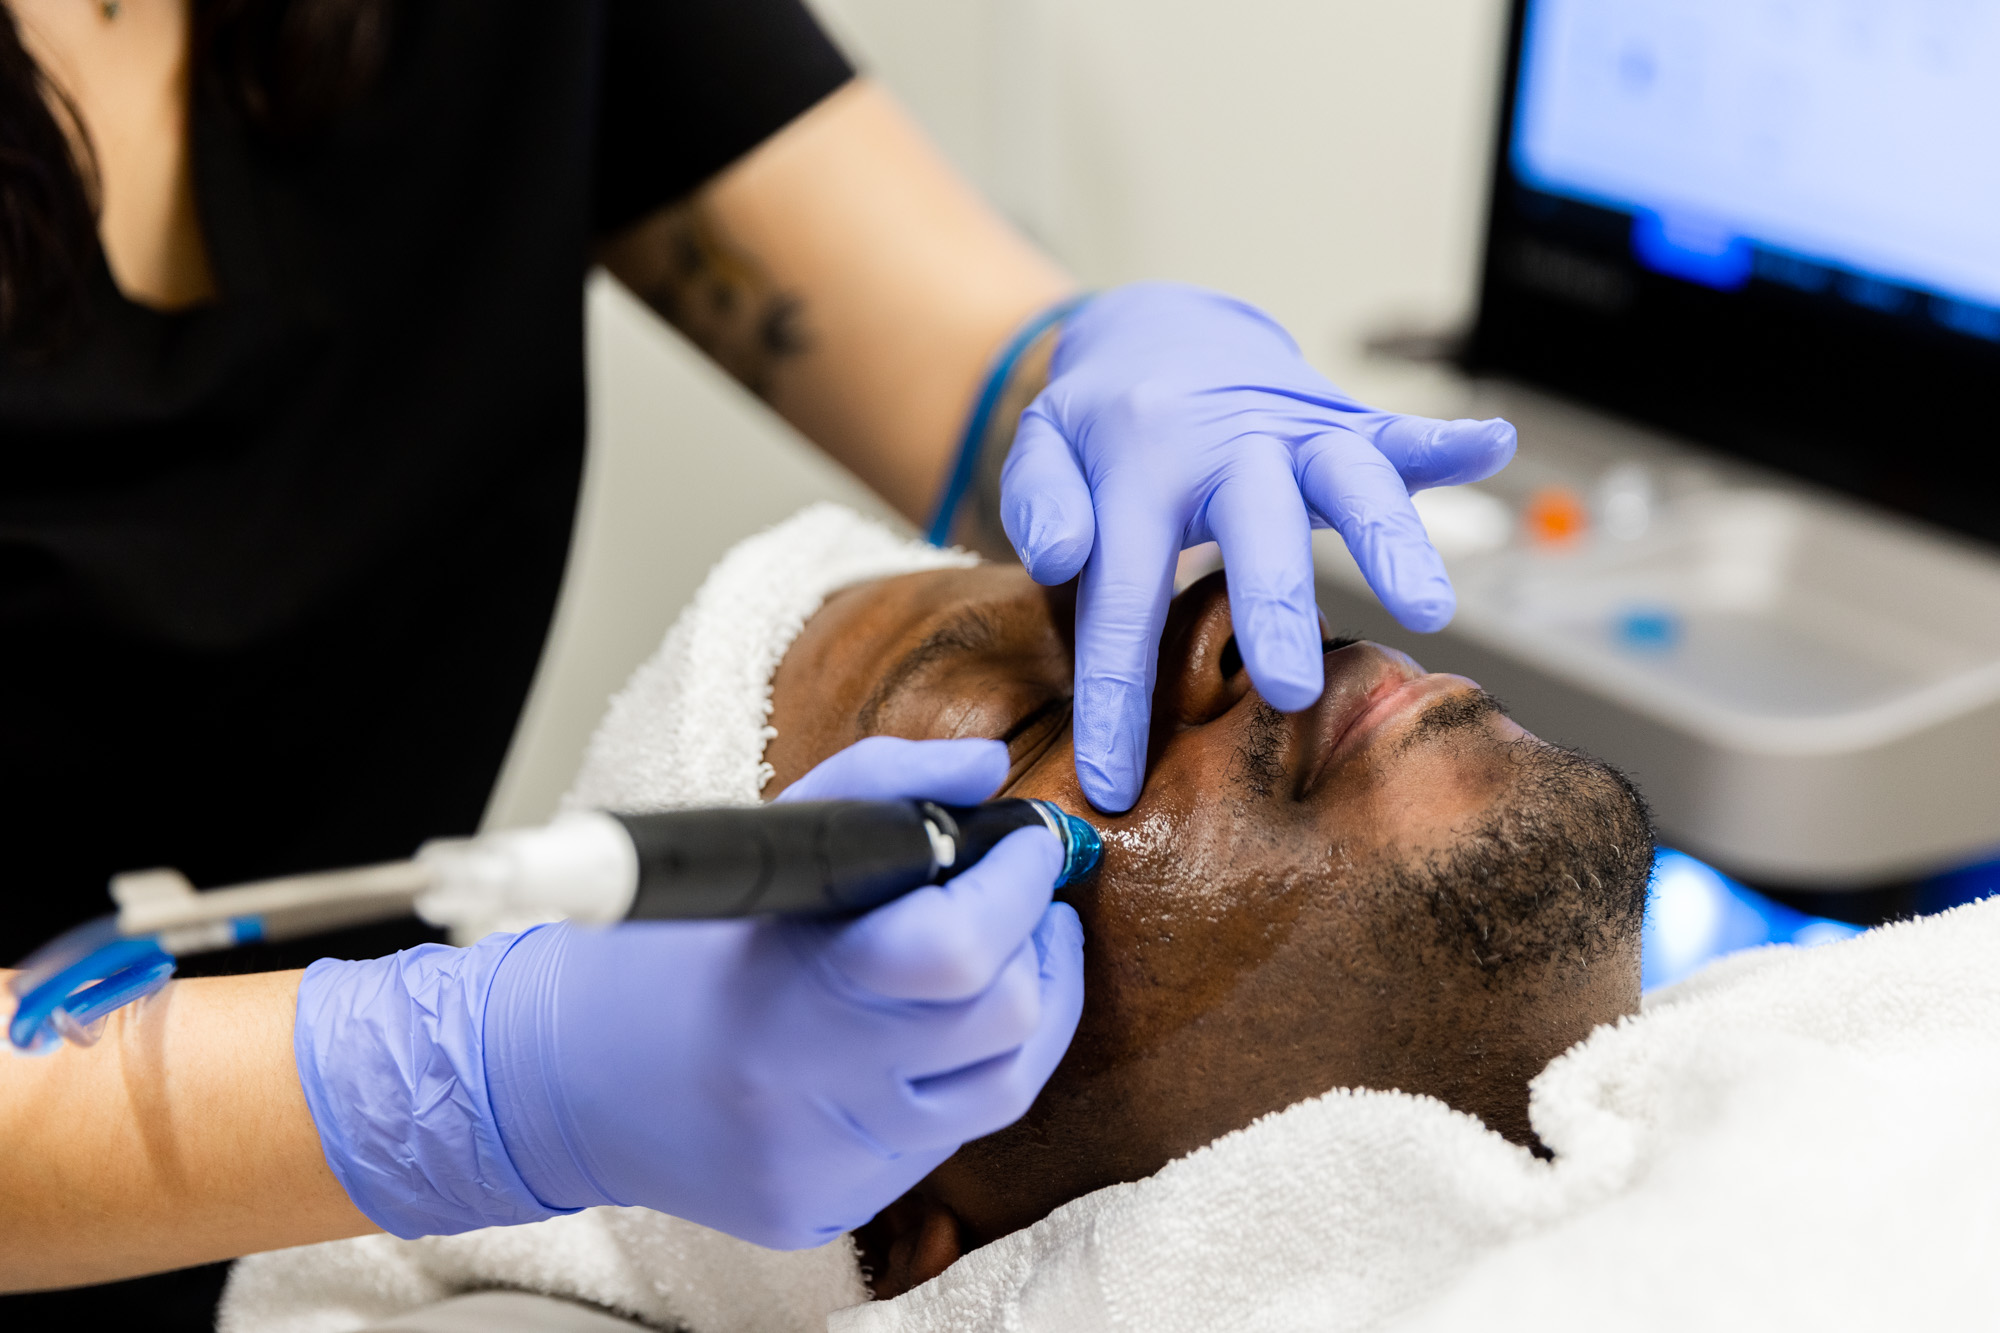 A male client receives a Hydrafacial from a Kansas City Skin and Cancer Center medical provider. The medical provider is wearing gloves and using one hand to hold the hydrafacial applicator and the other hand to guide the tool along the client's cheek.